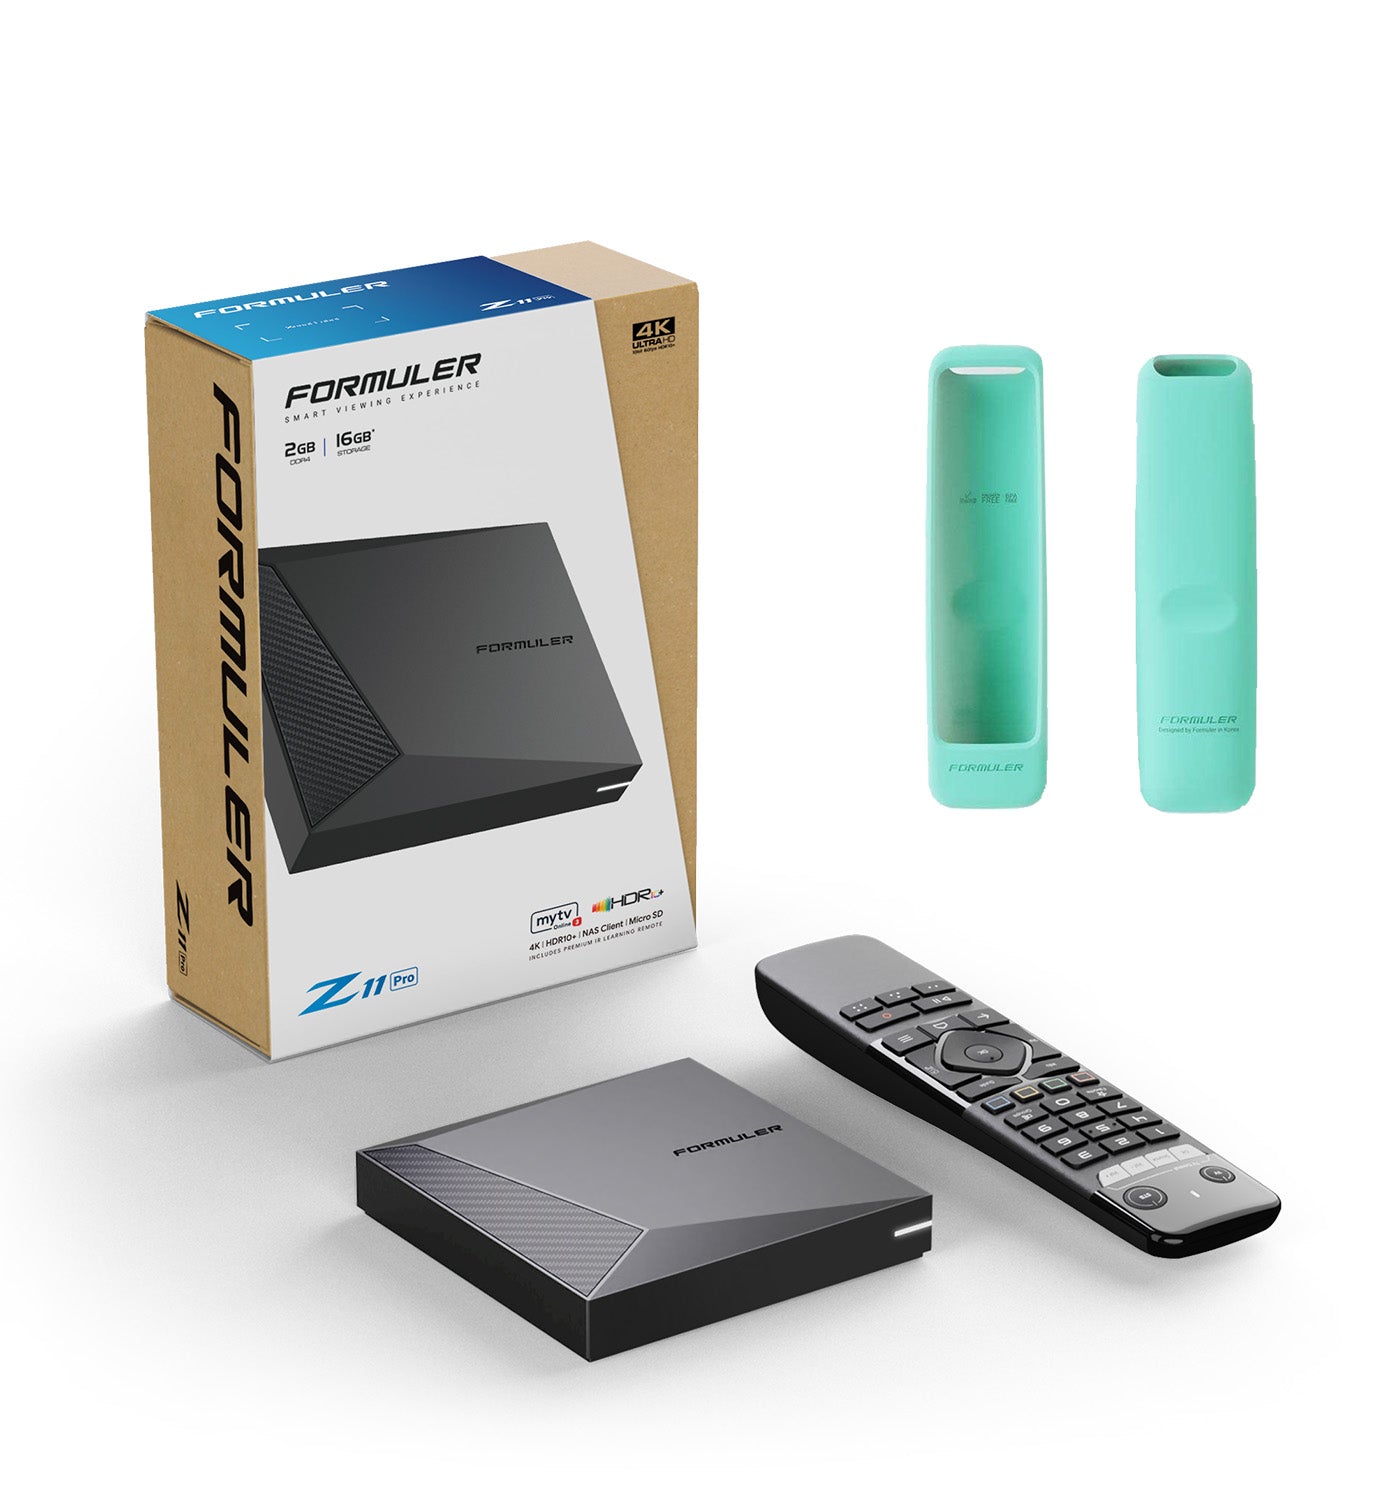 Formuler Z11 Pro + FREE ACCESSORY: 1x Turquoise Remote Cover